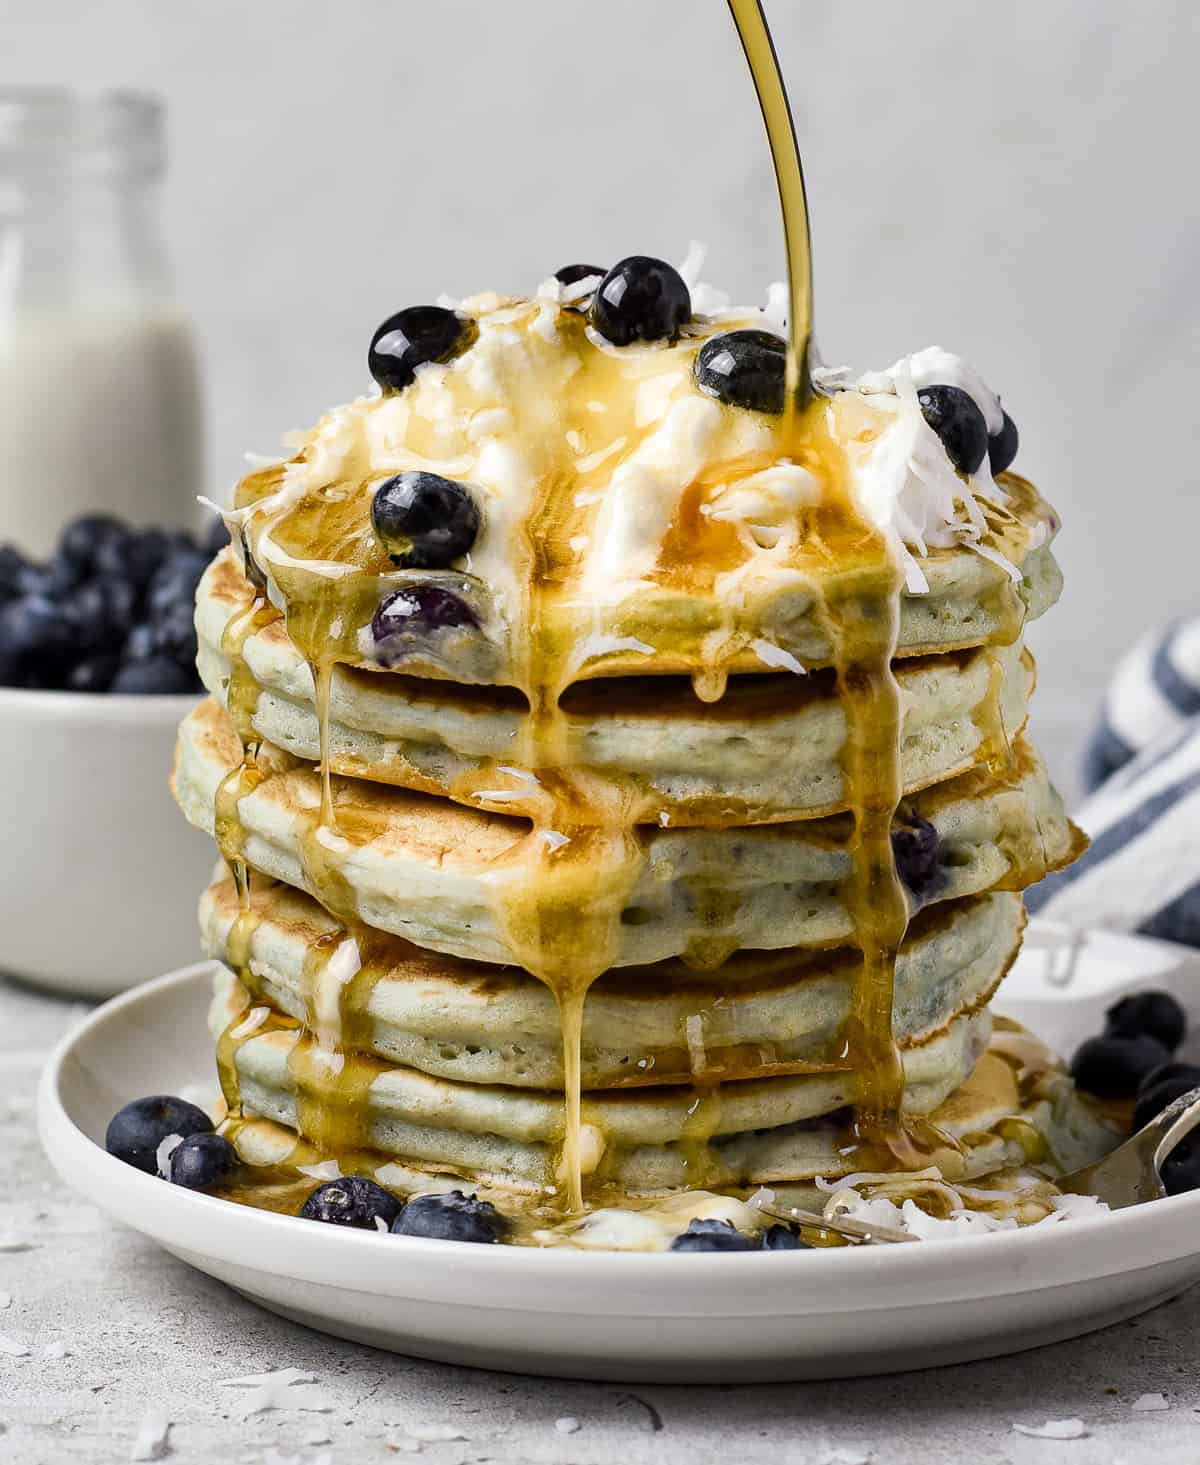 vegan blueberry pancakes on plate with maple syrup, whipped cream, and blueberries.